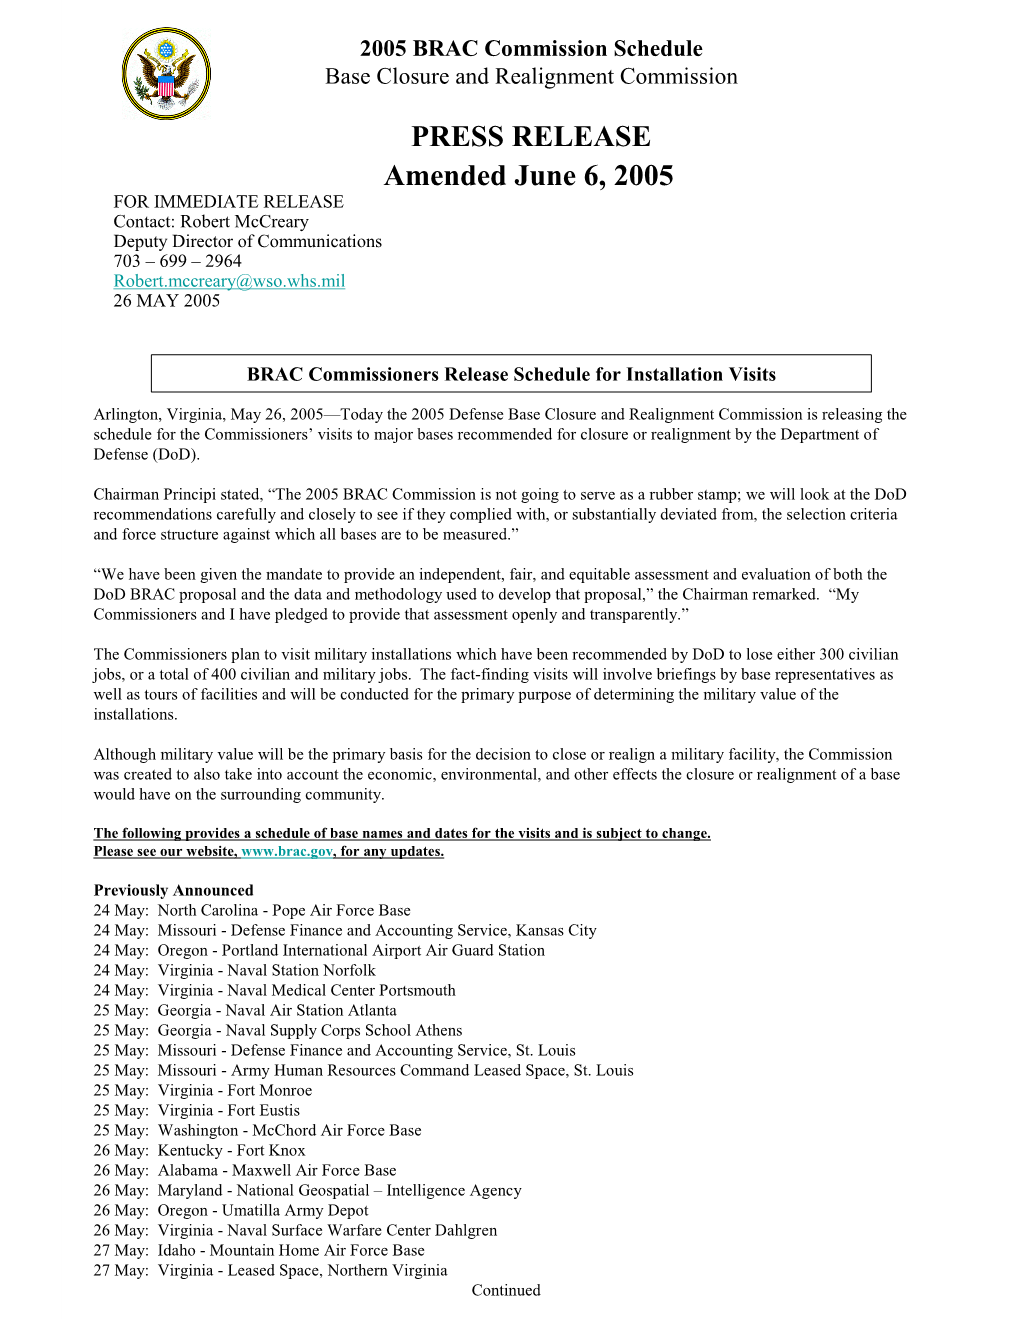 PRESS RELEASE Amended June 6, 2005